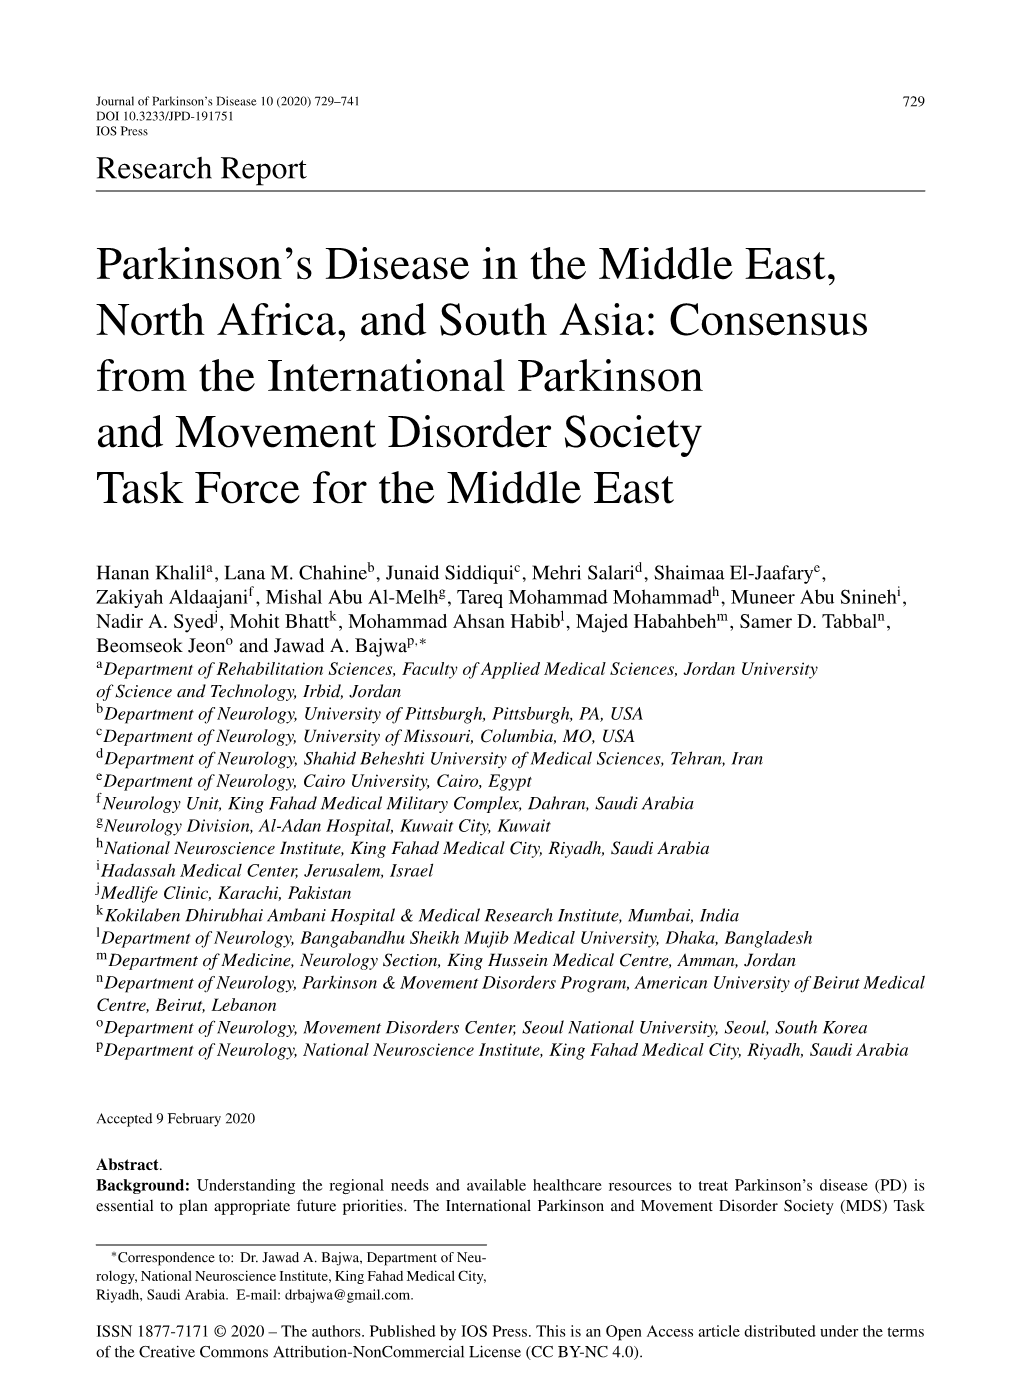 Parkinson's Disease in the Middle East, North Africa, And